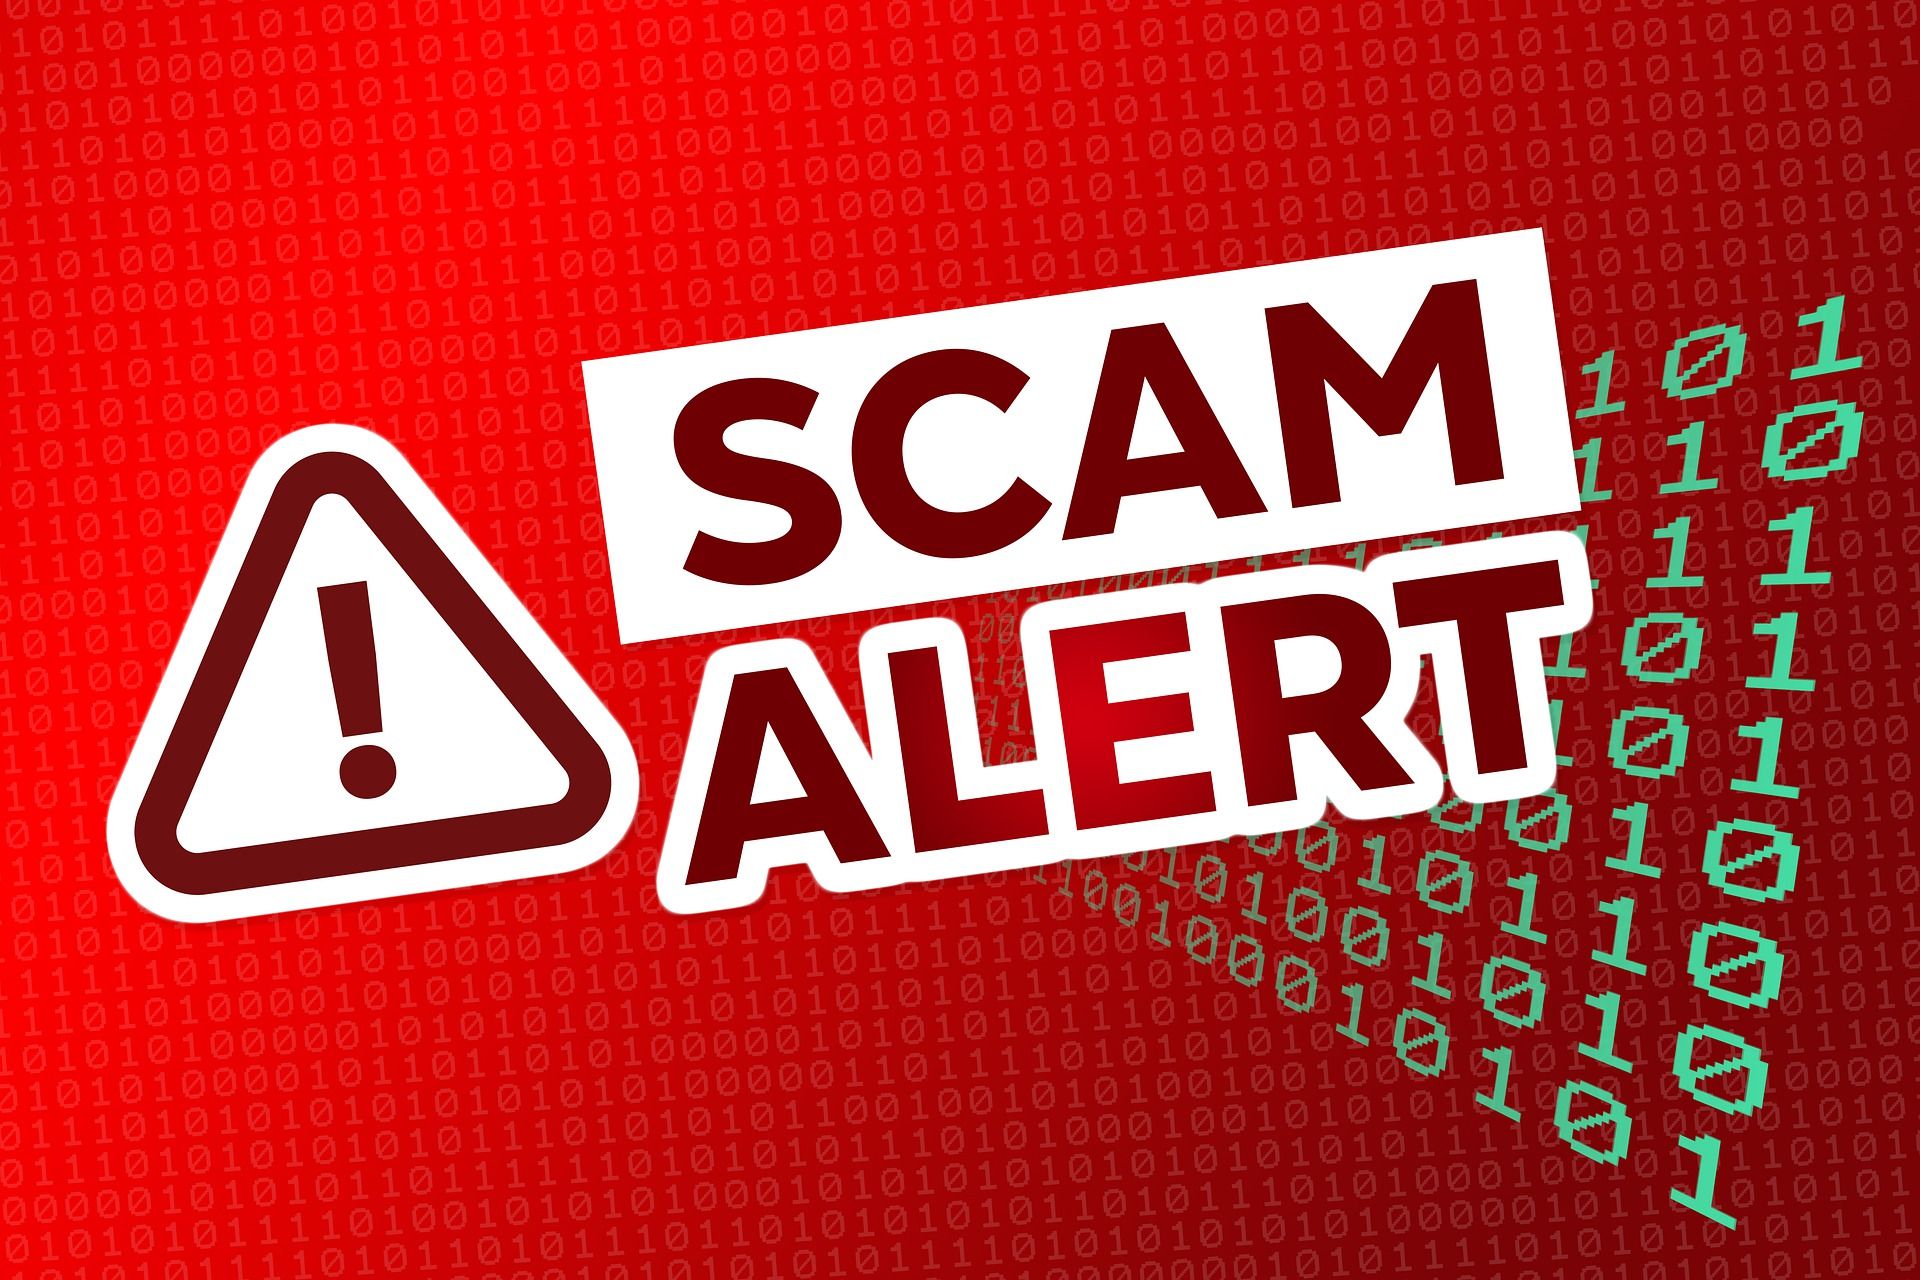 Scammers carry out extensive toll service text scams in the US, the FBI warns